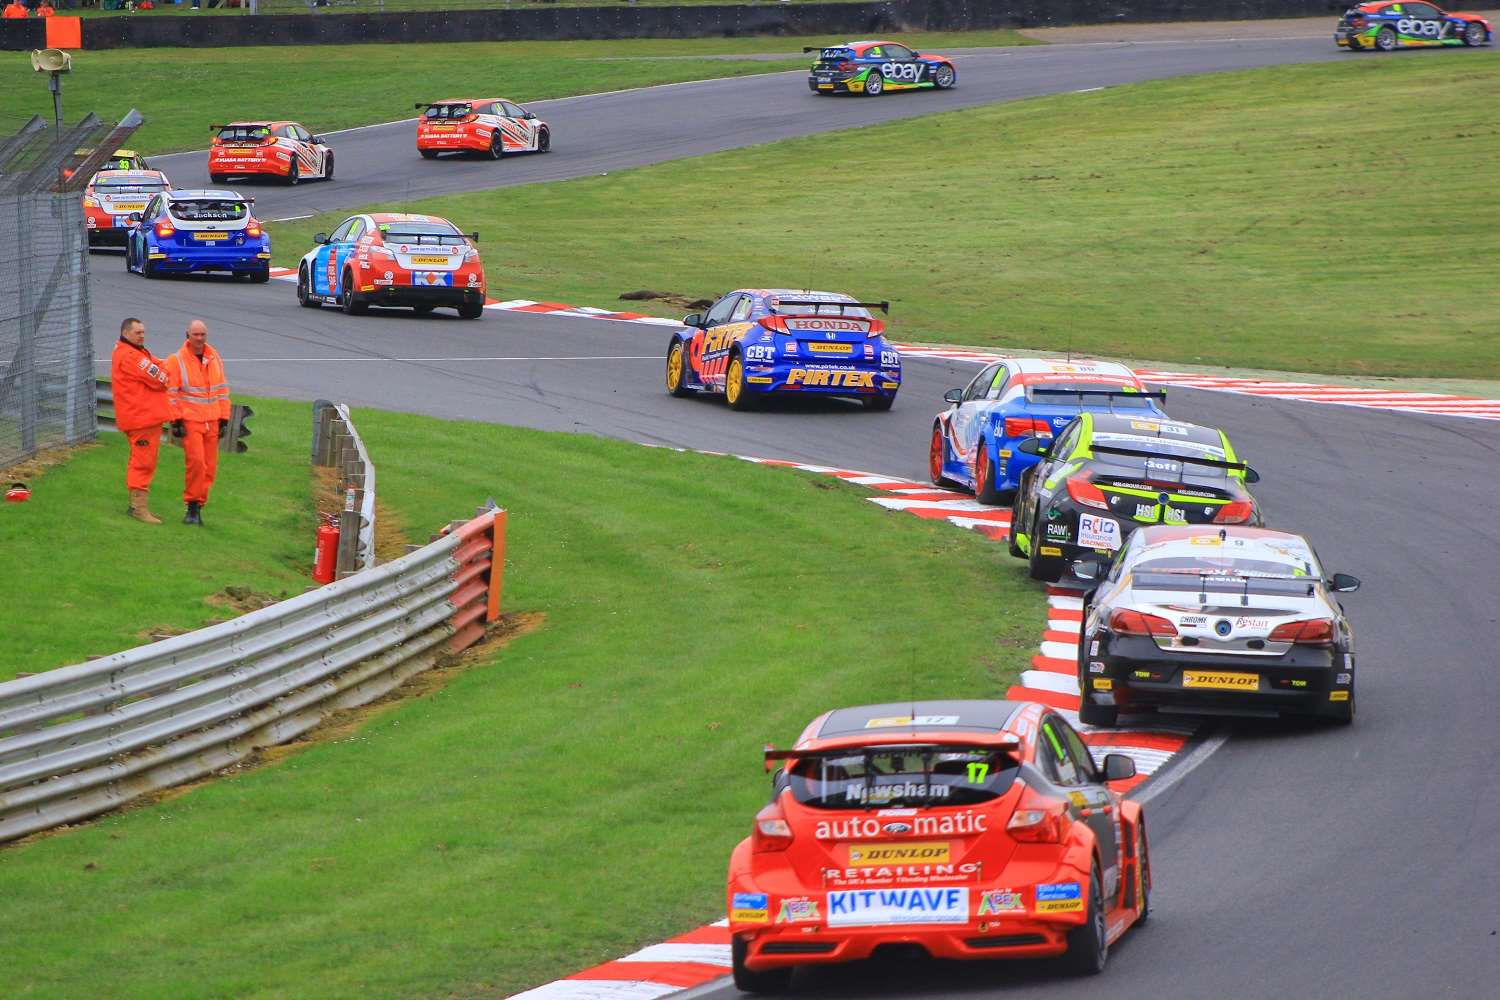 The strong BTCC field piles into Clearways. Picture - Joe Wright